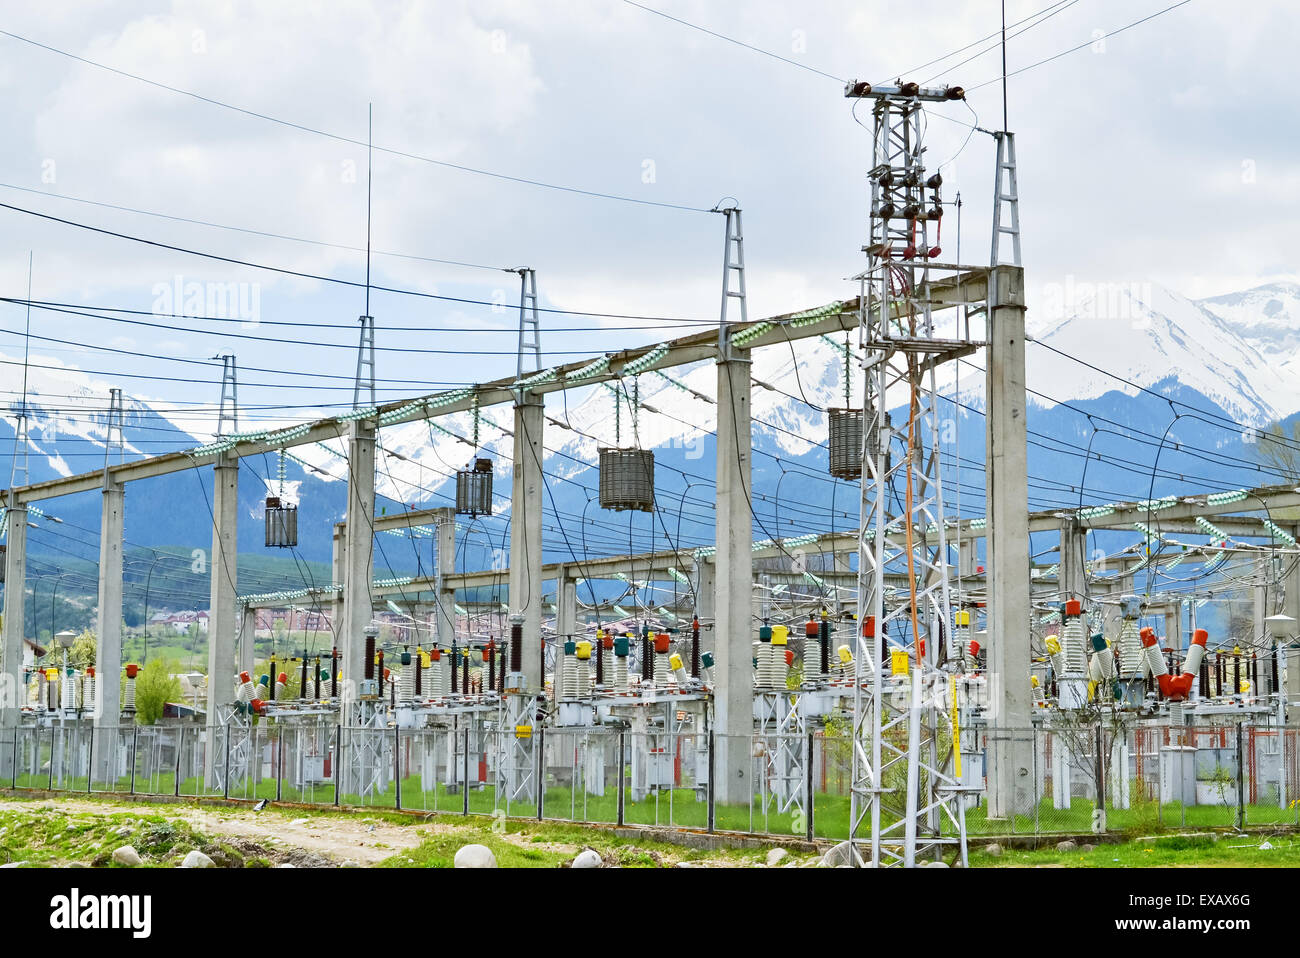 Substation for high voltage conversion and distribution of electricity Stock Photo